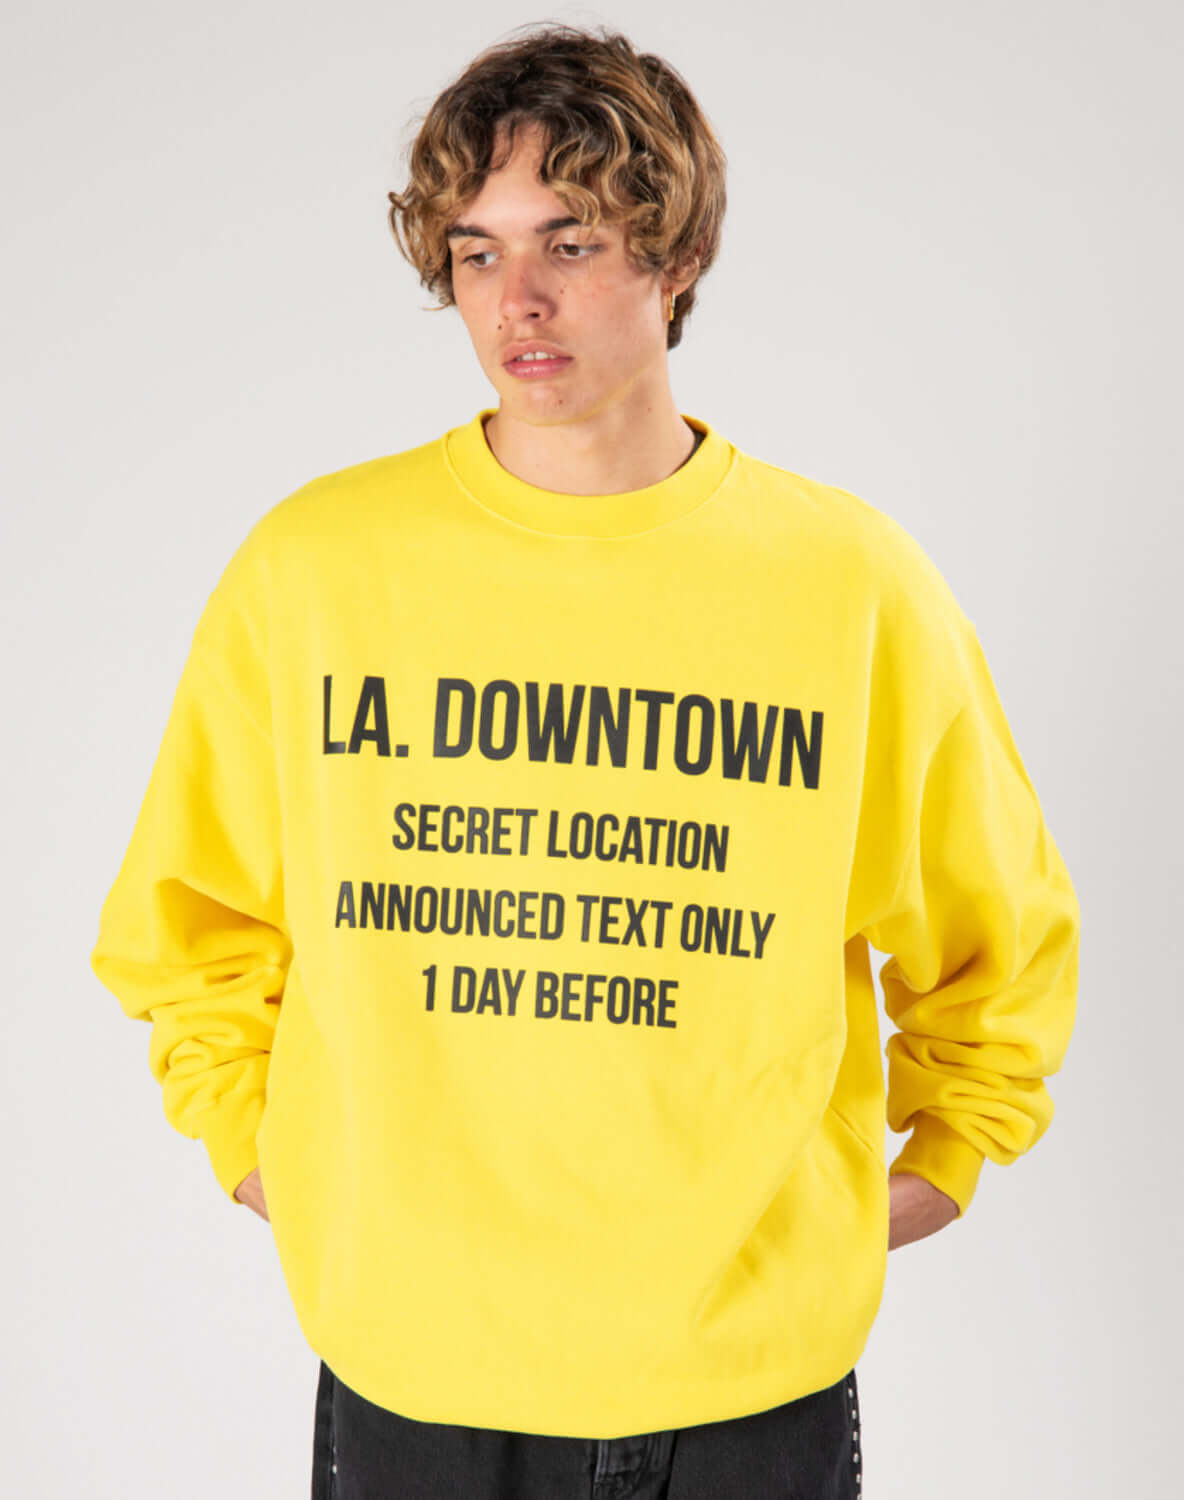 LA DOWNTOWN SWEATER Round neck sweater with flocked text print on the front. Little HTC logo on the back. Oversize fit. HTC LOS ANGELES